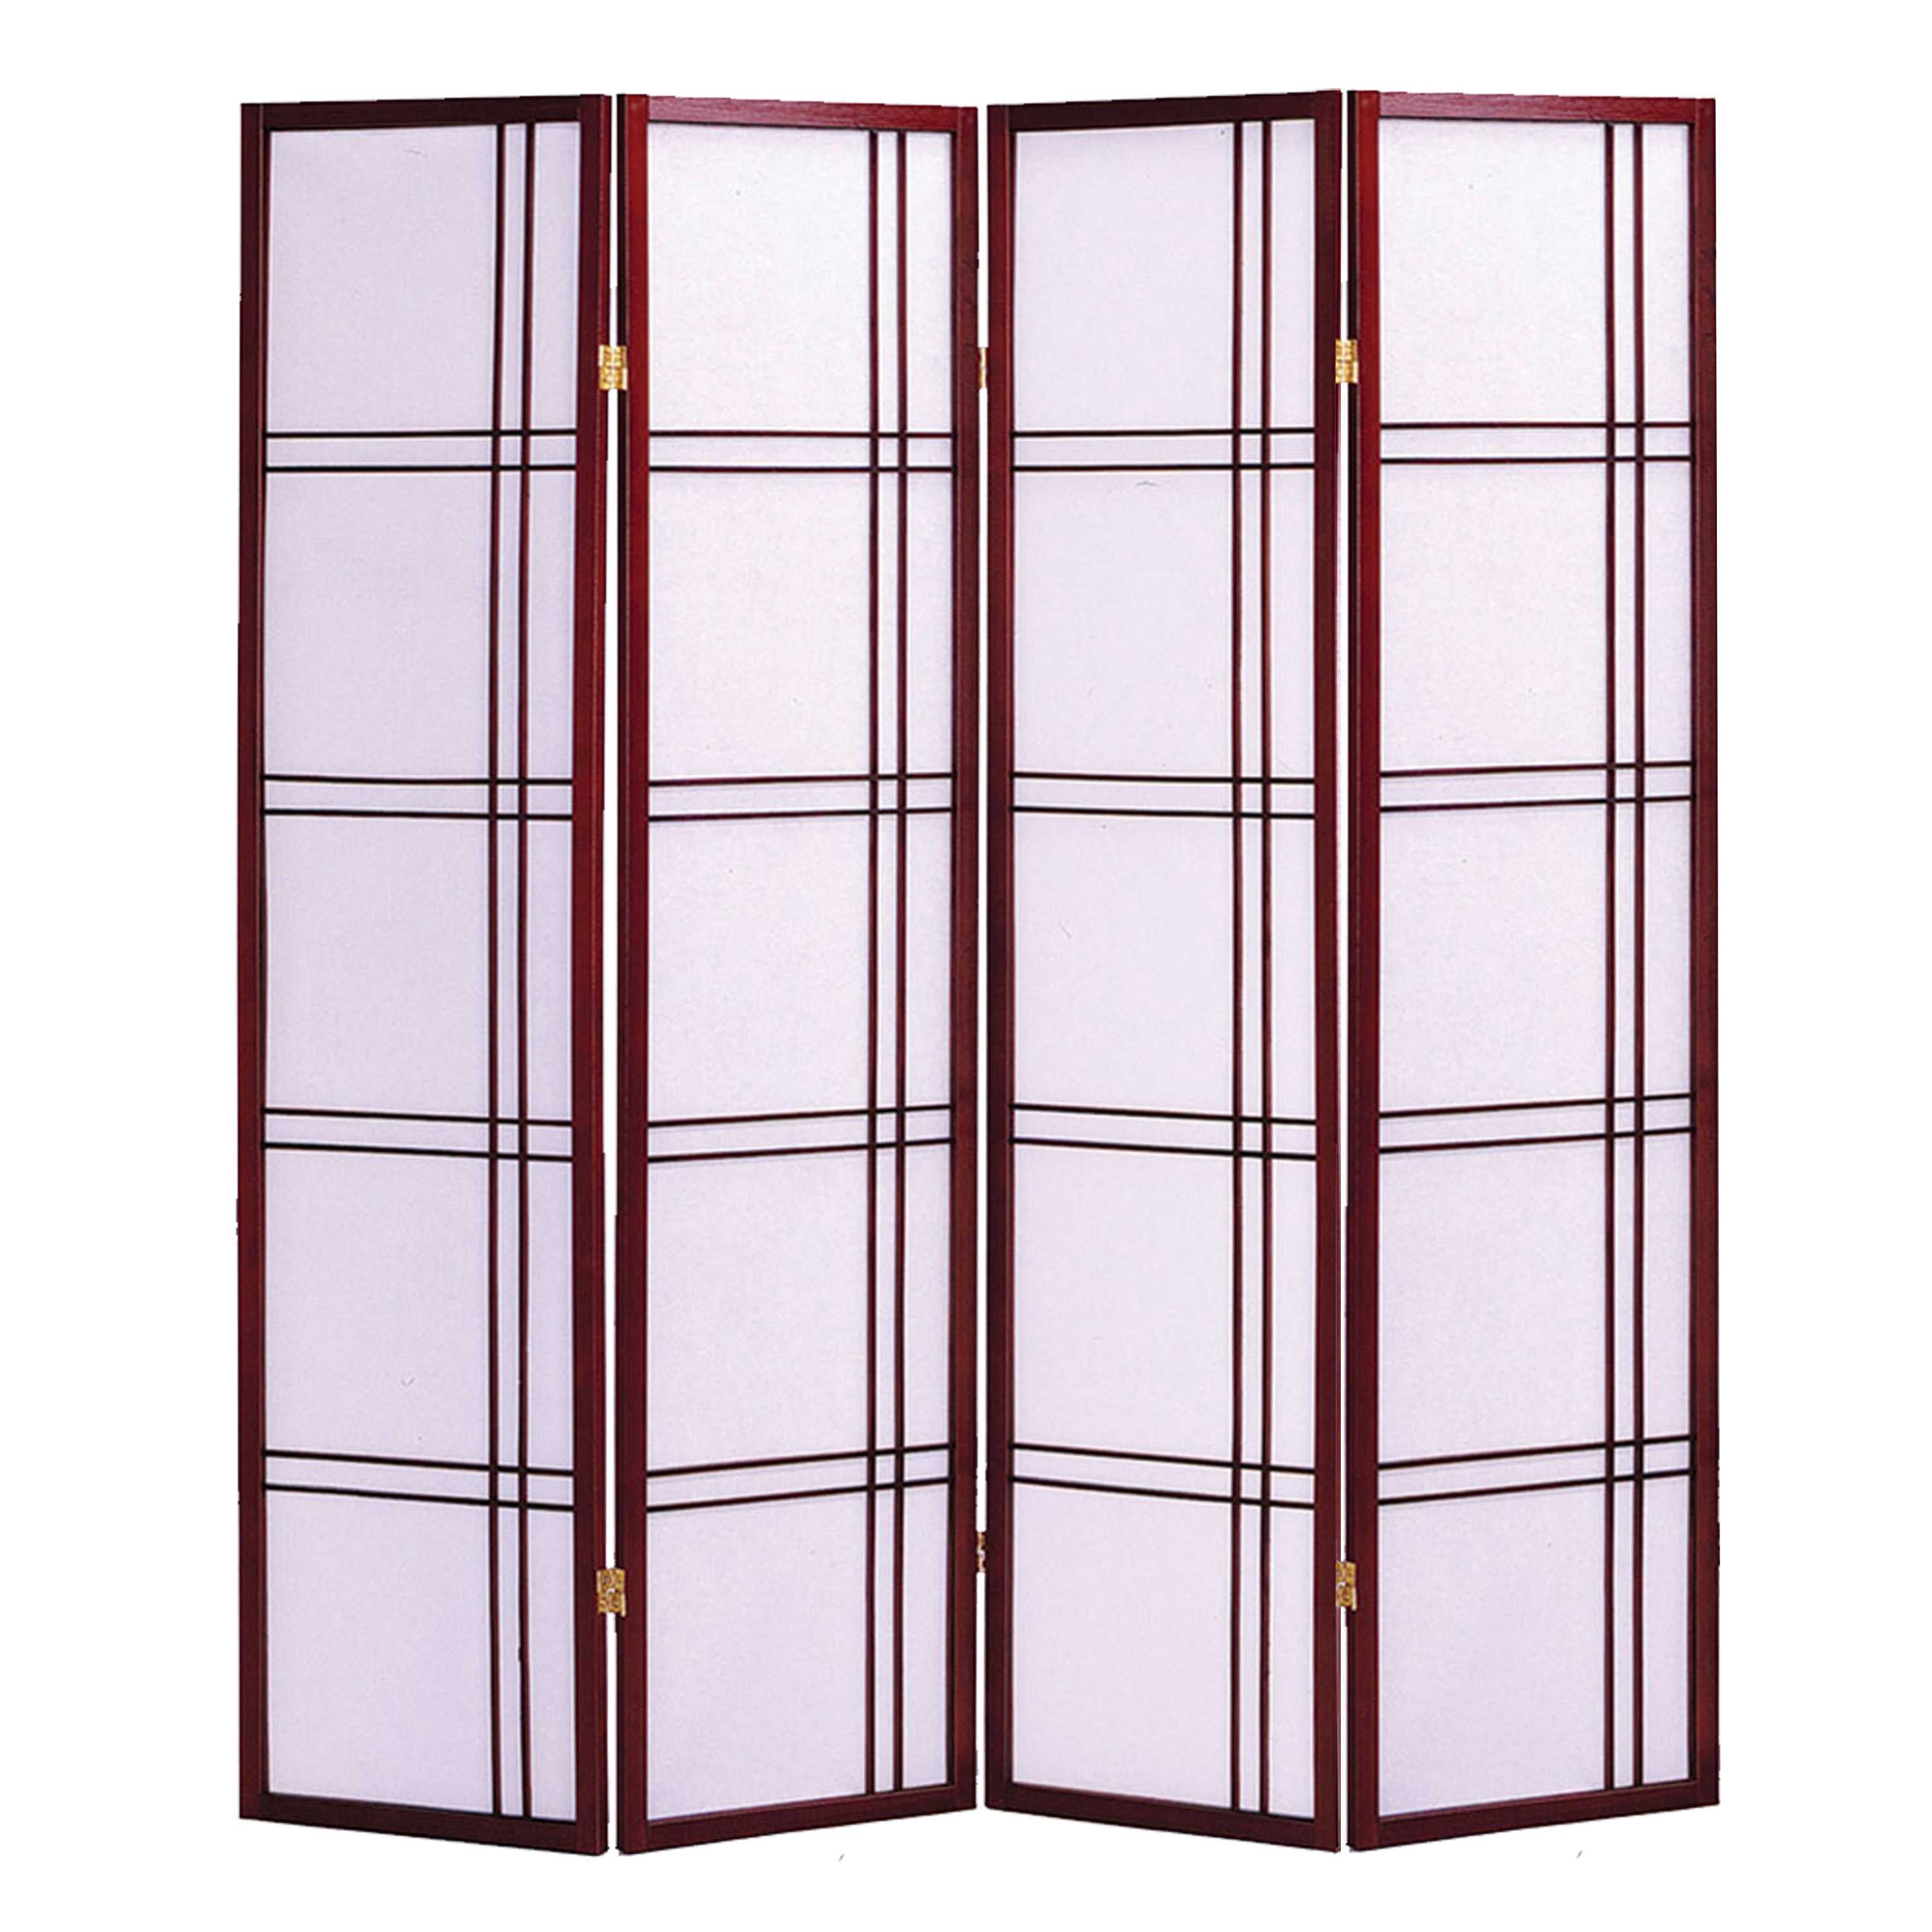 Wooden 4 Panel Room Divider with Checkered Shoji Inserts, Brown and White